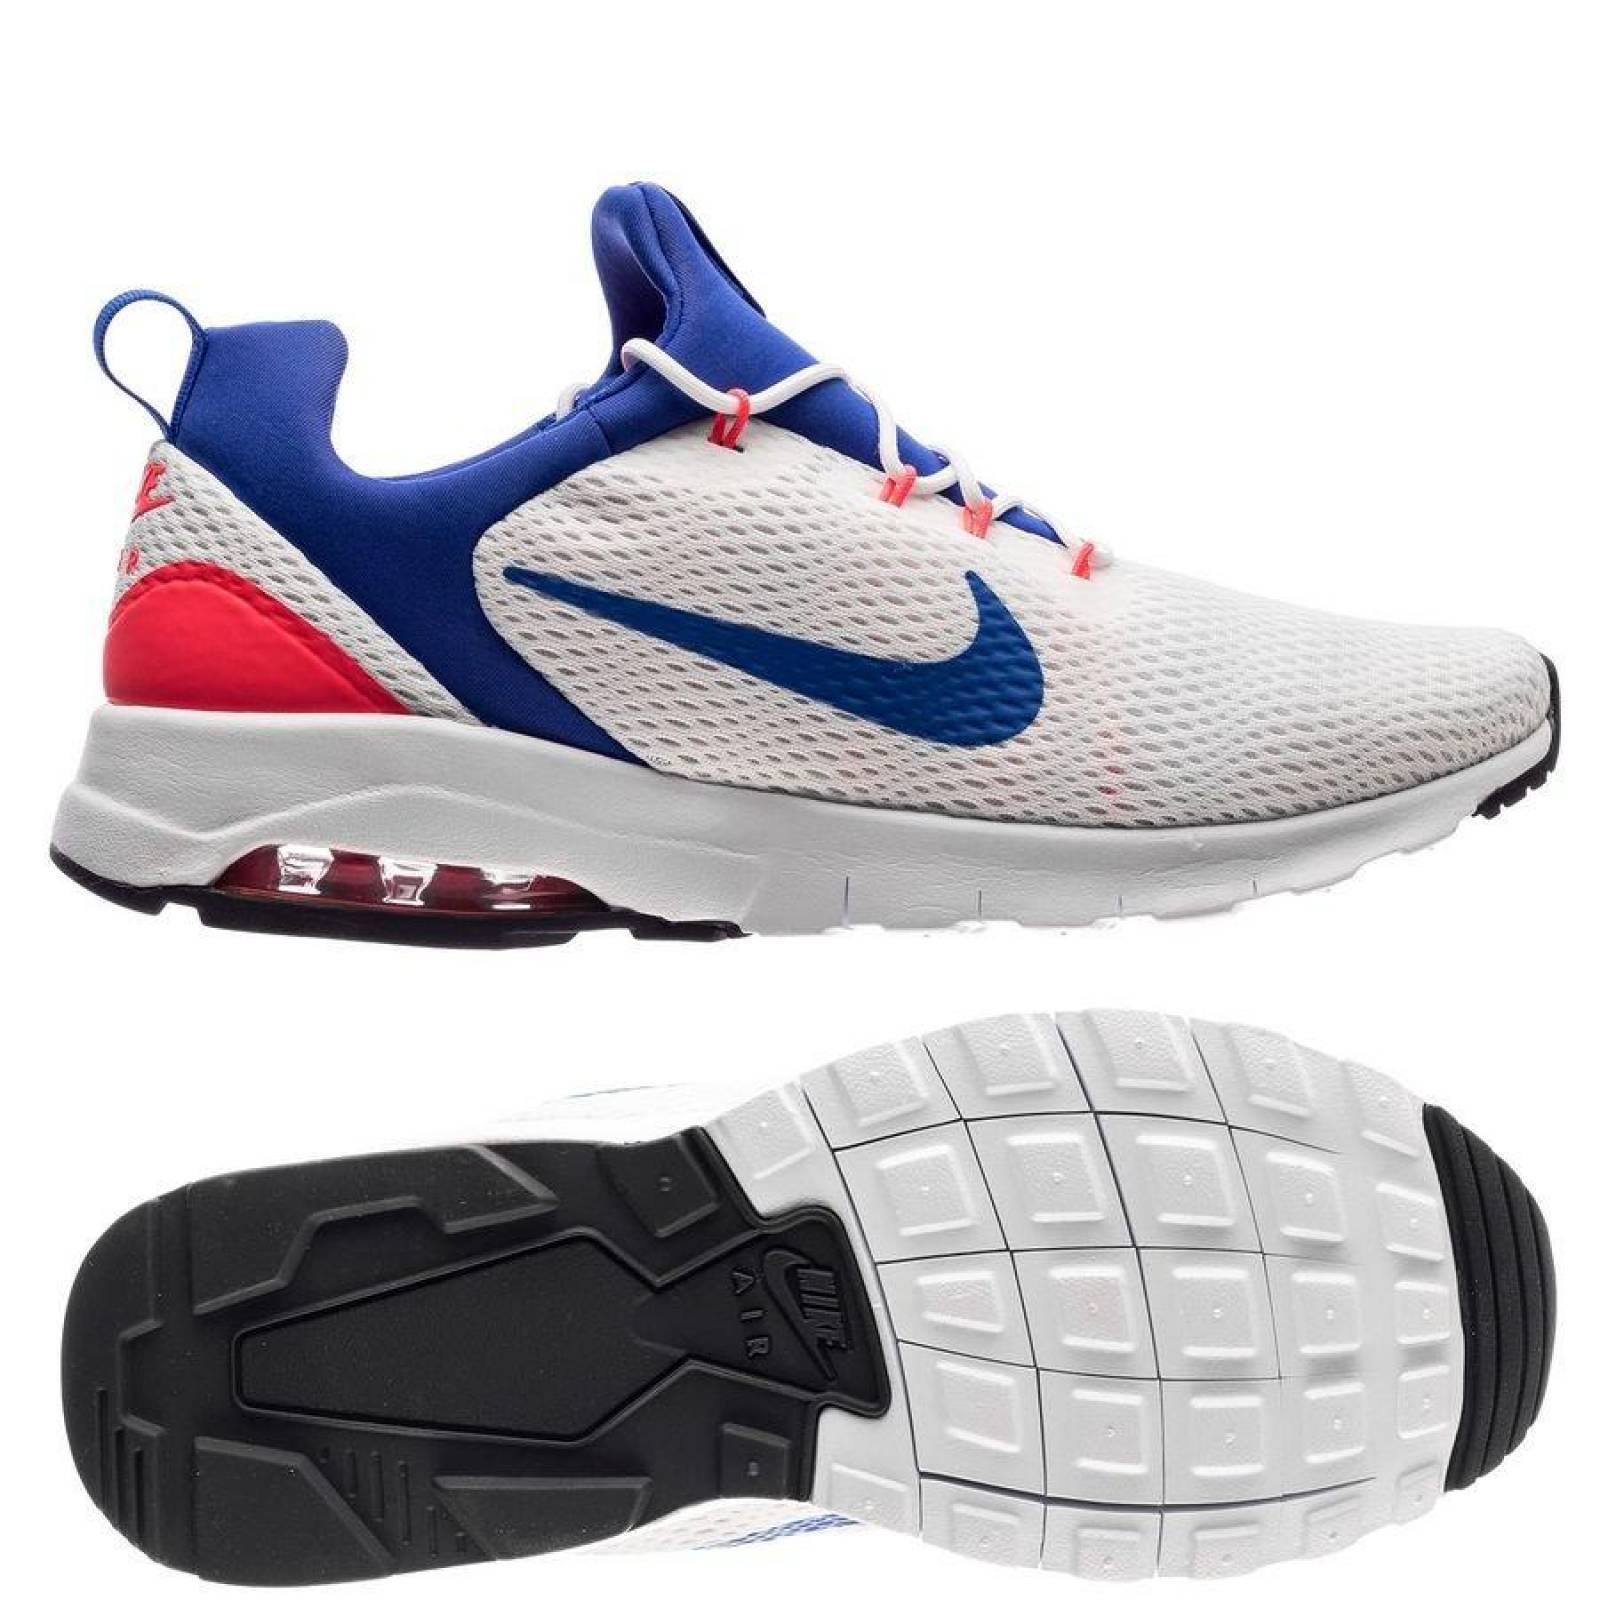 Tenis Nike Air Max Motion Racer Hombre Correr 